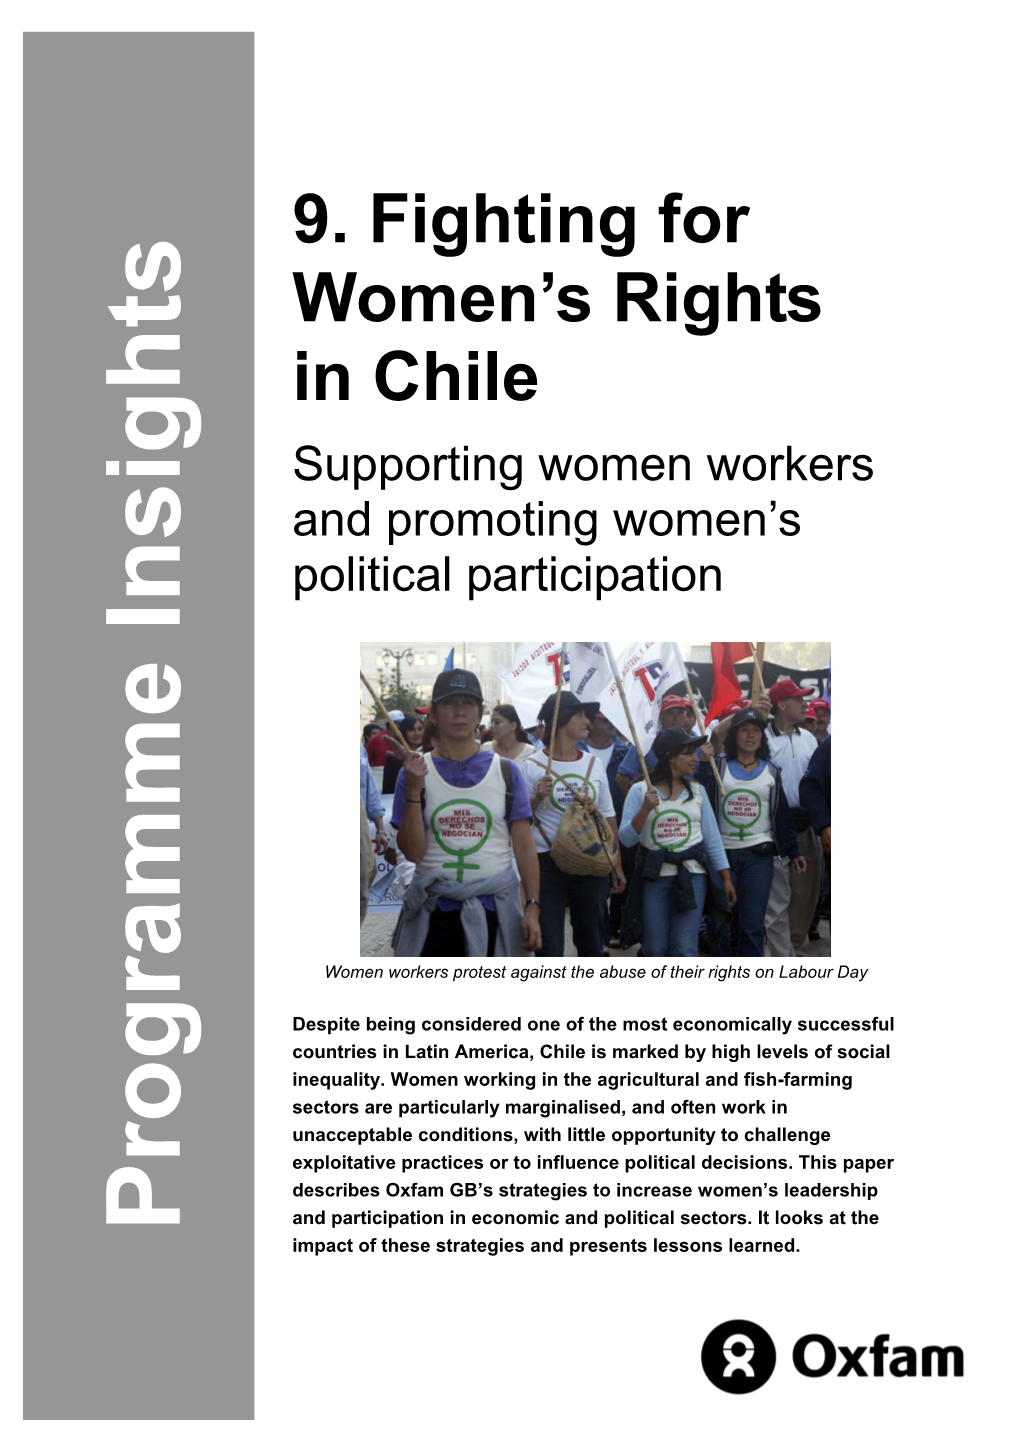 Fighting for Women's Rights in Chile: Supporting Women Workers And